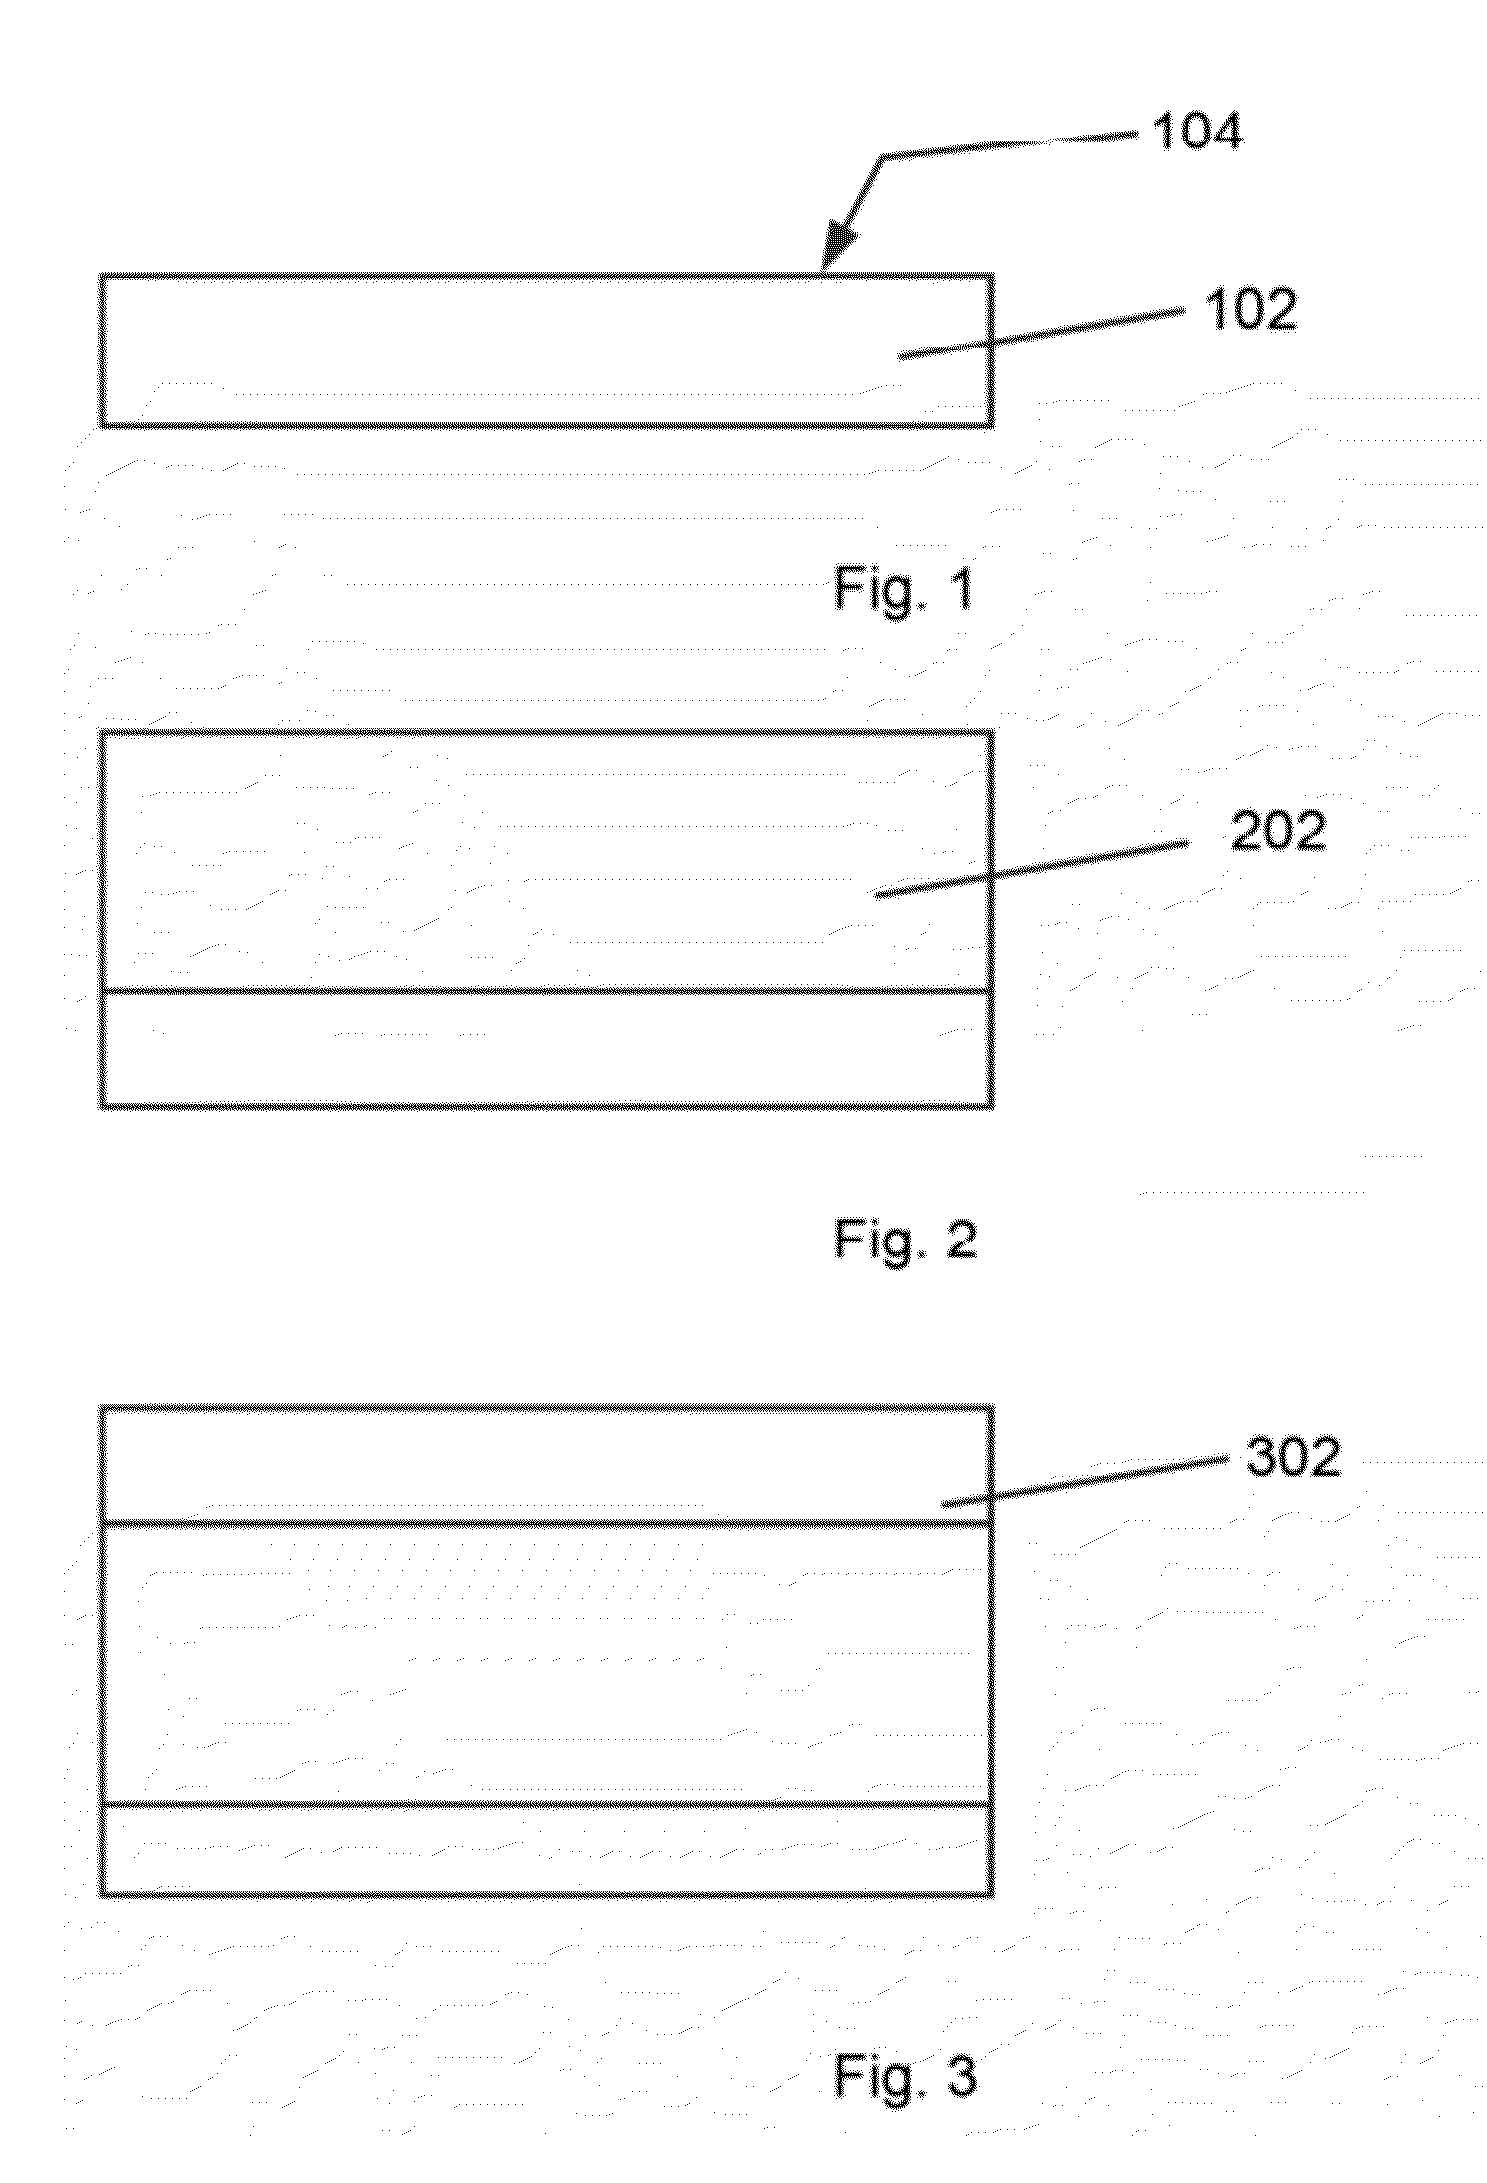 Stackable non-volatile resistive switching memory device and method